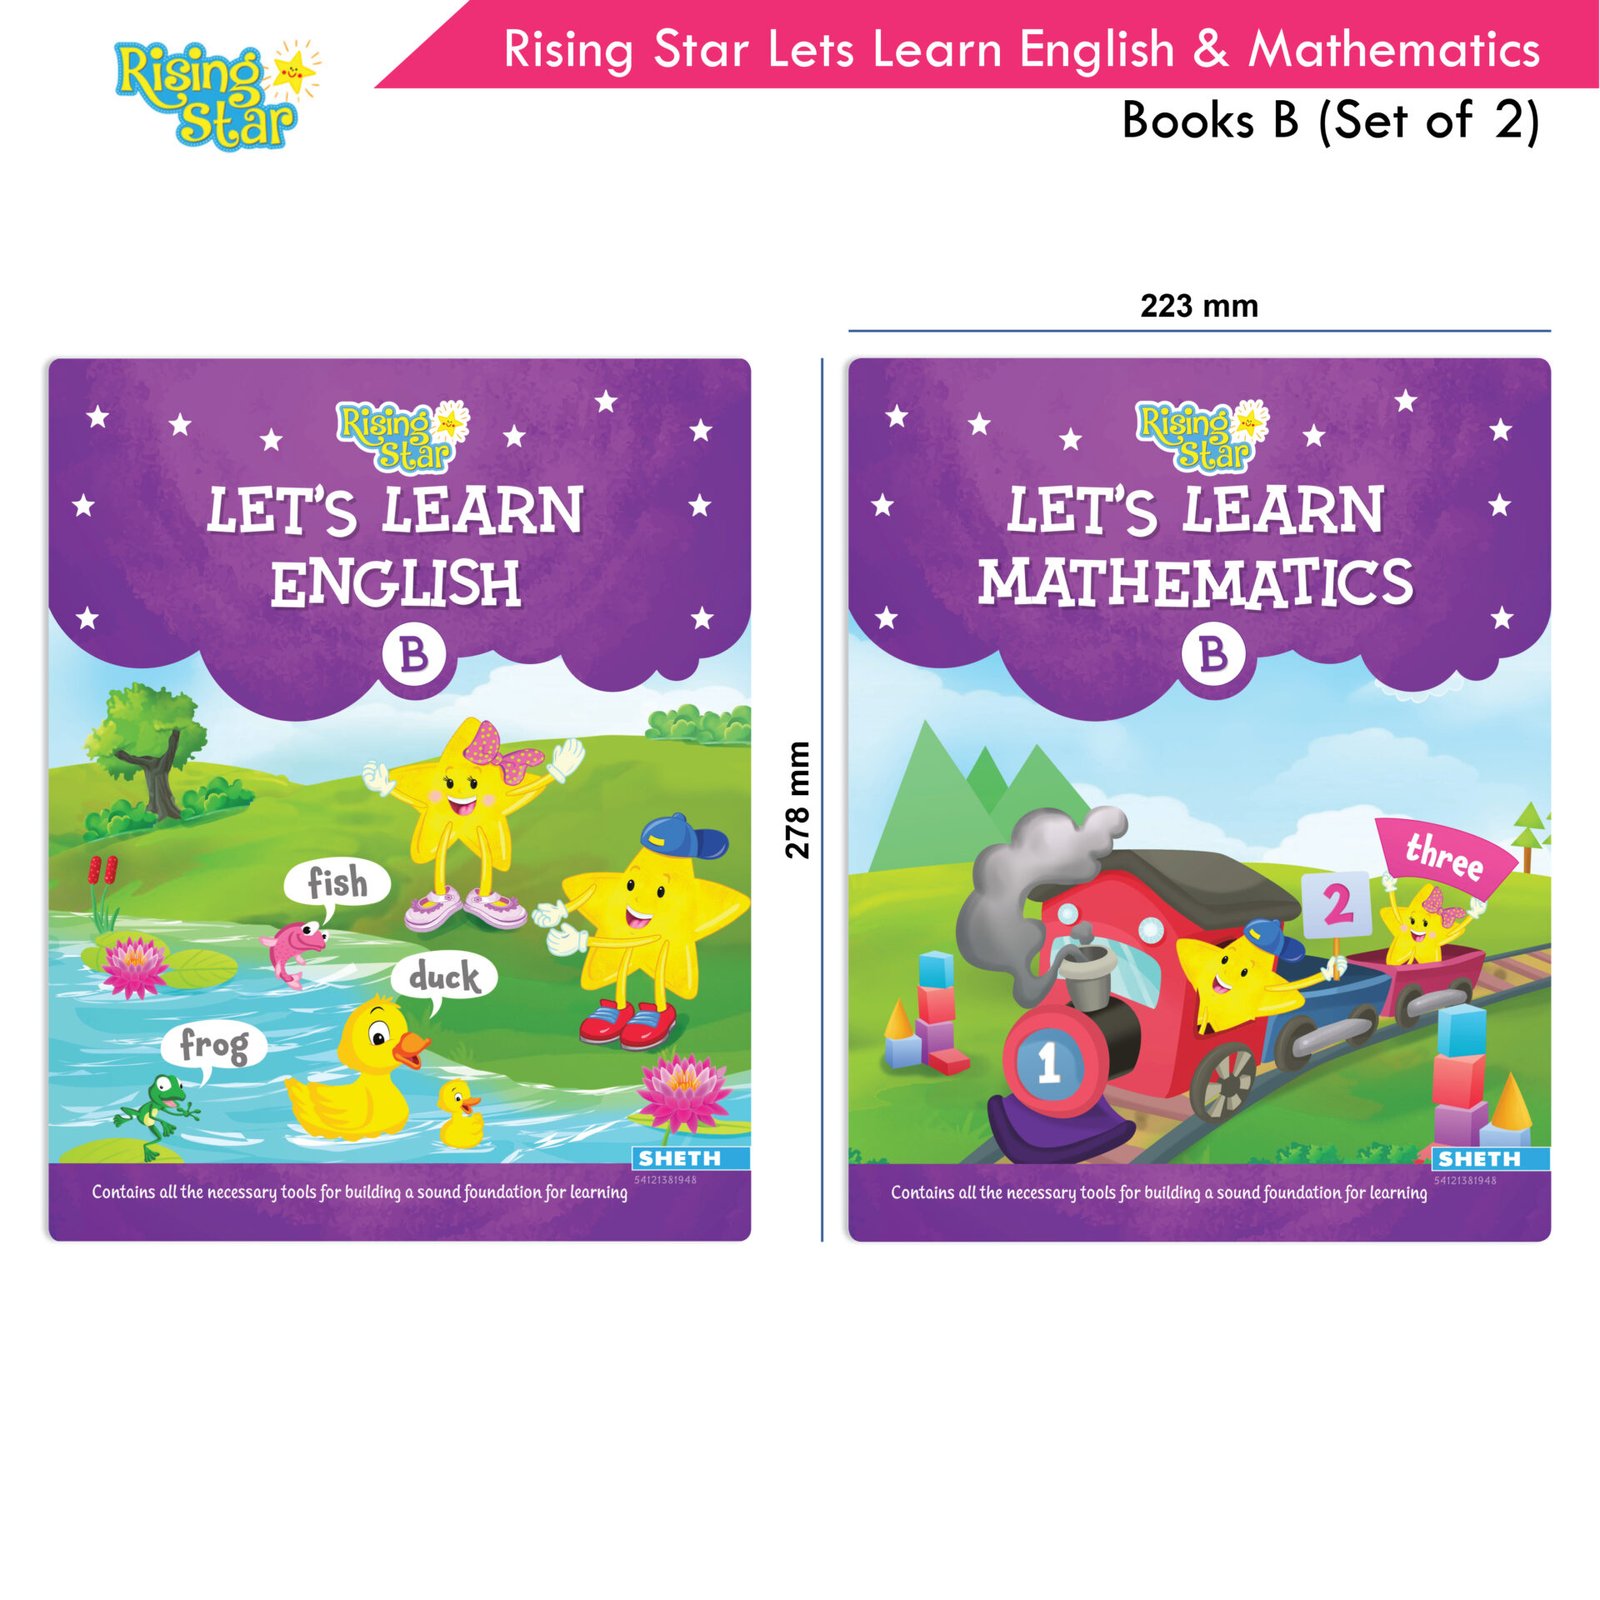 Rising Star Lets Learn English and Mathematics Books B Set of 2 2